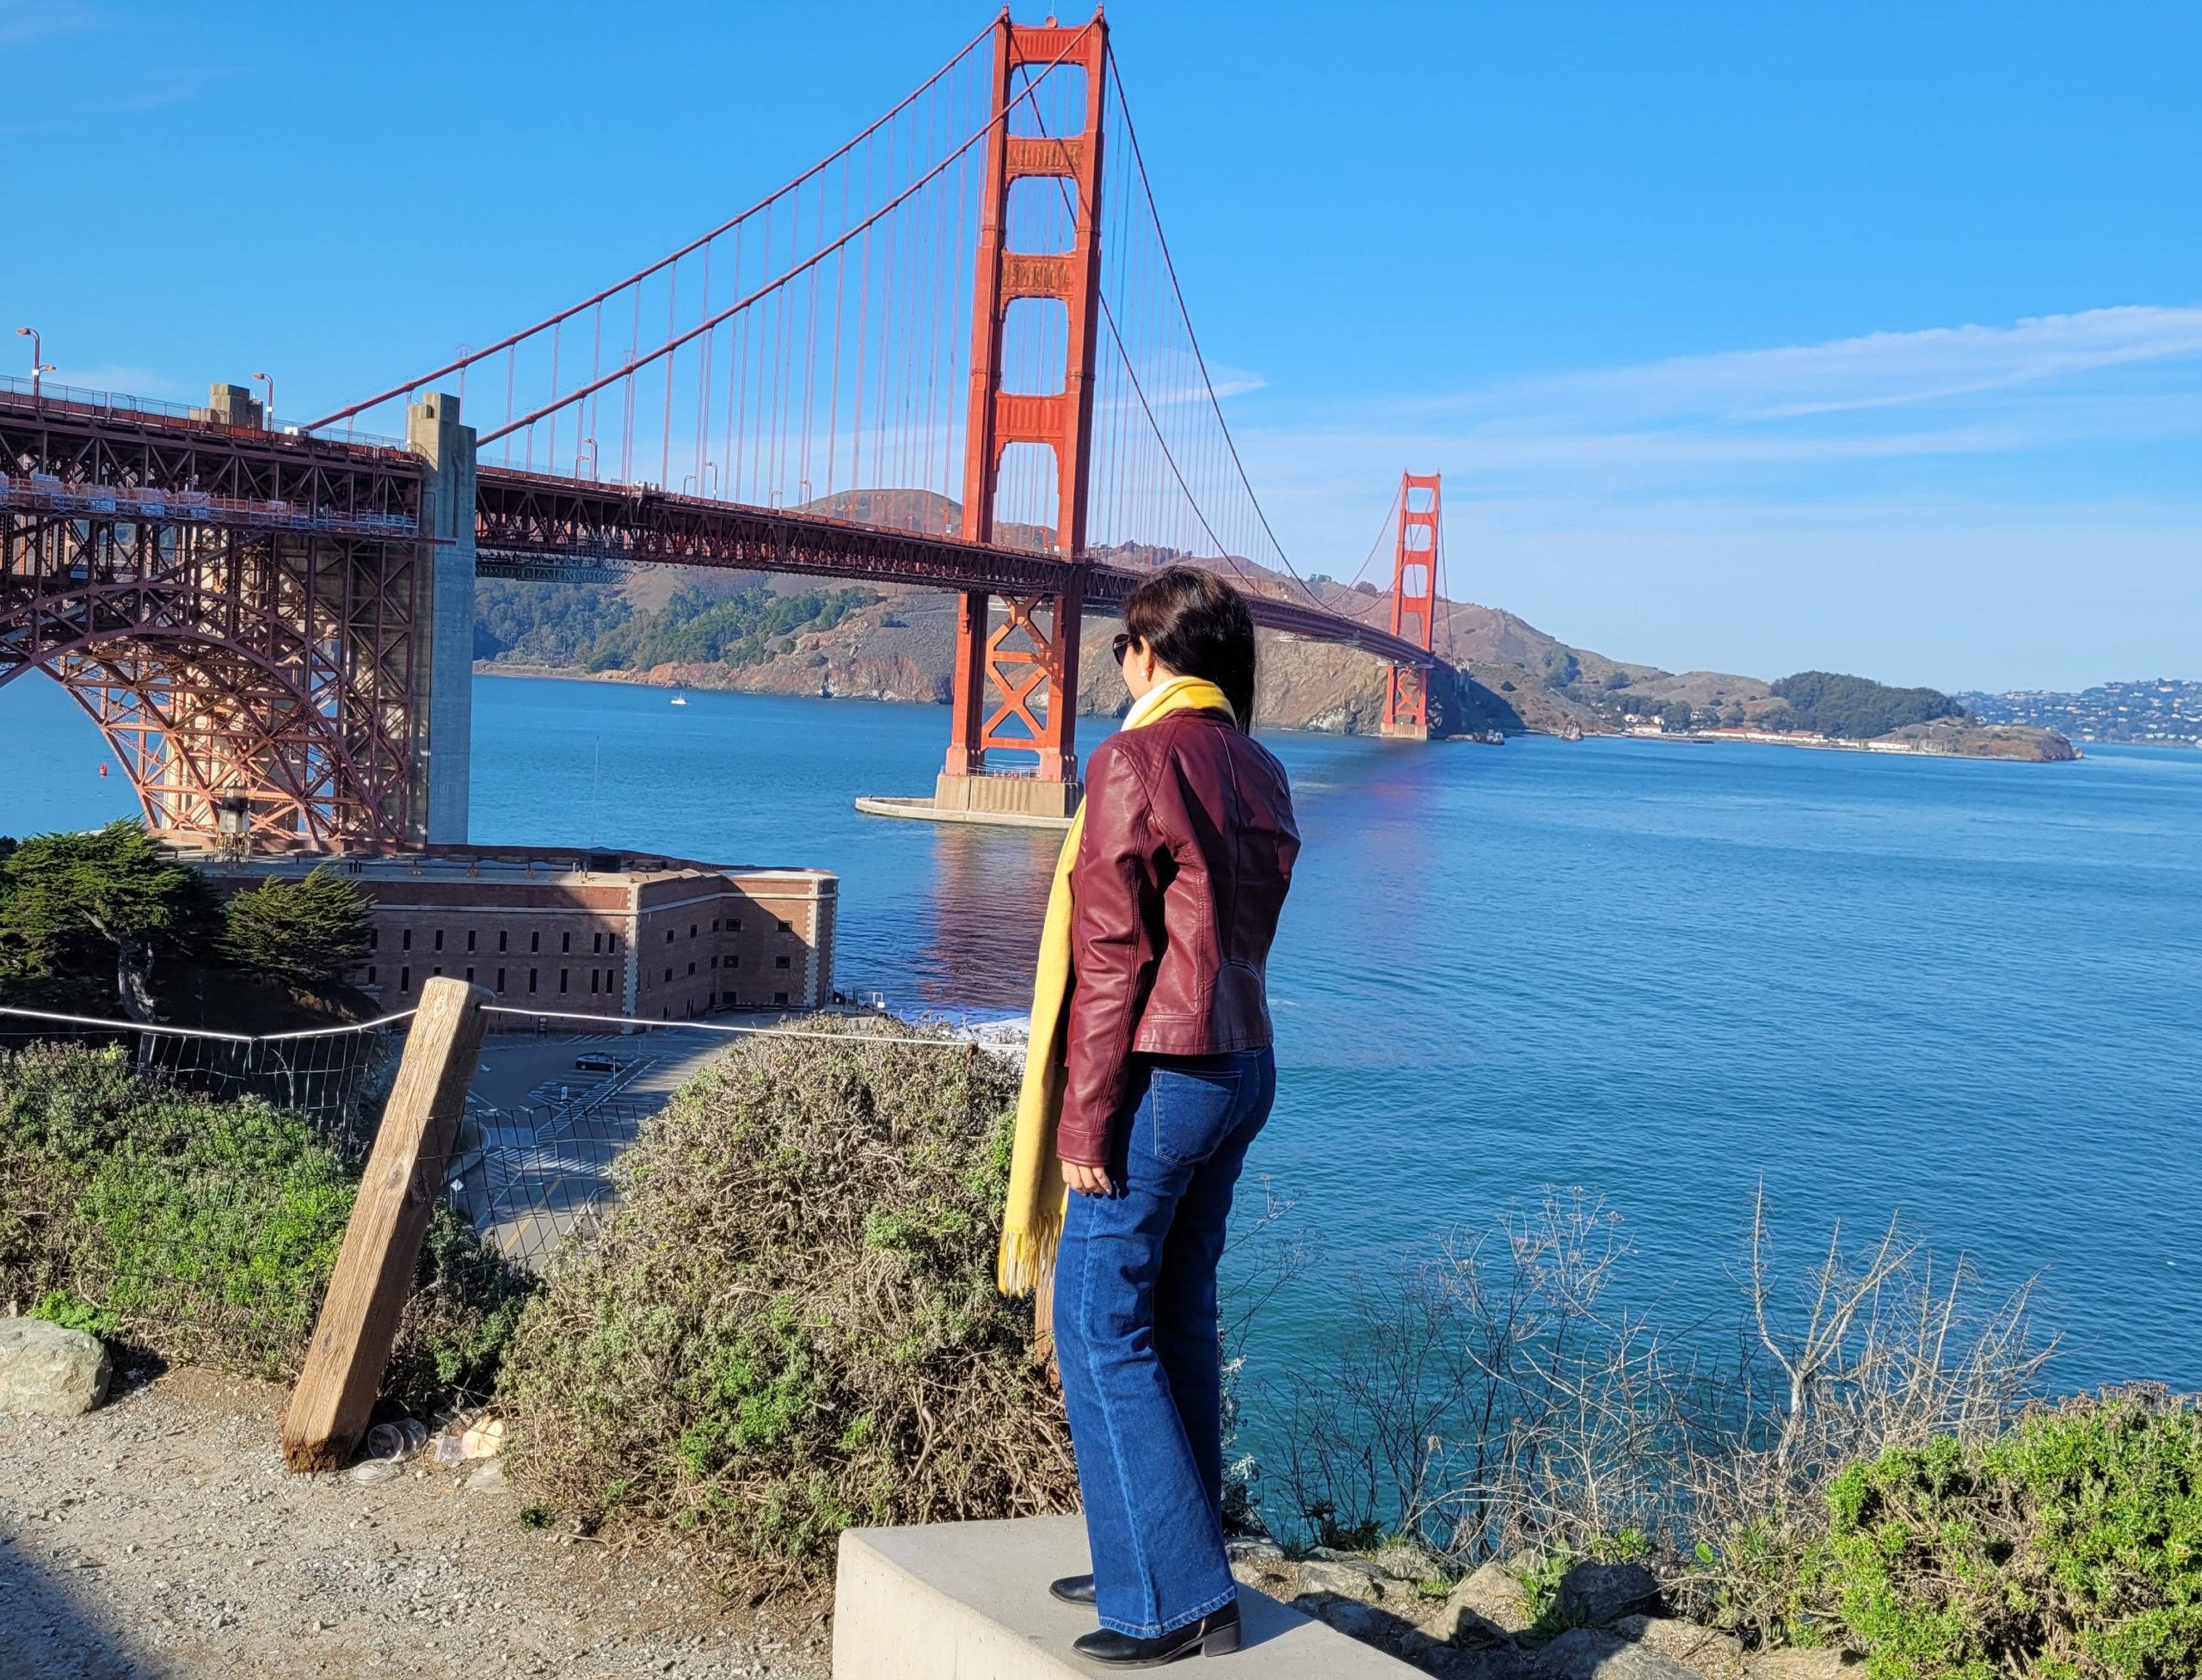 visited golden gate bridge in san francisco in my recent trip - must see